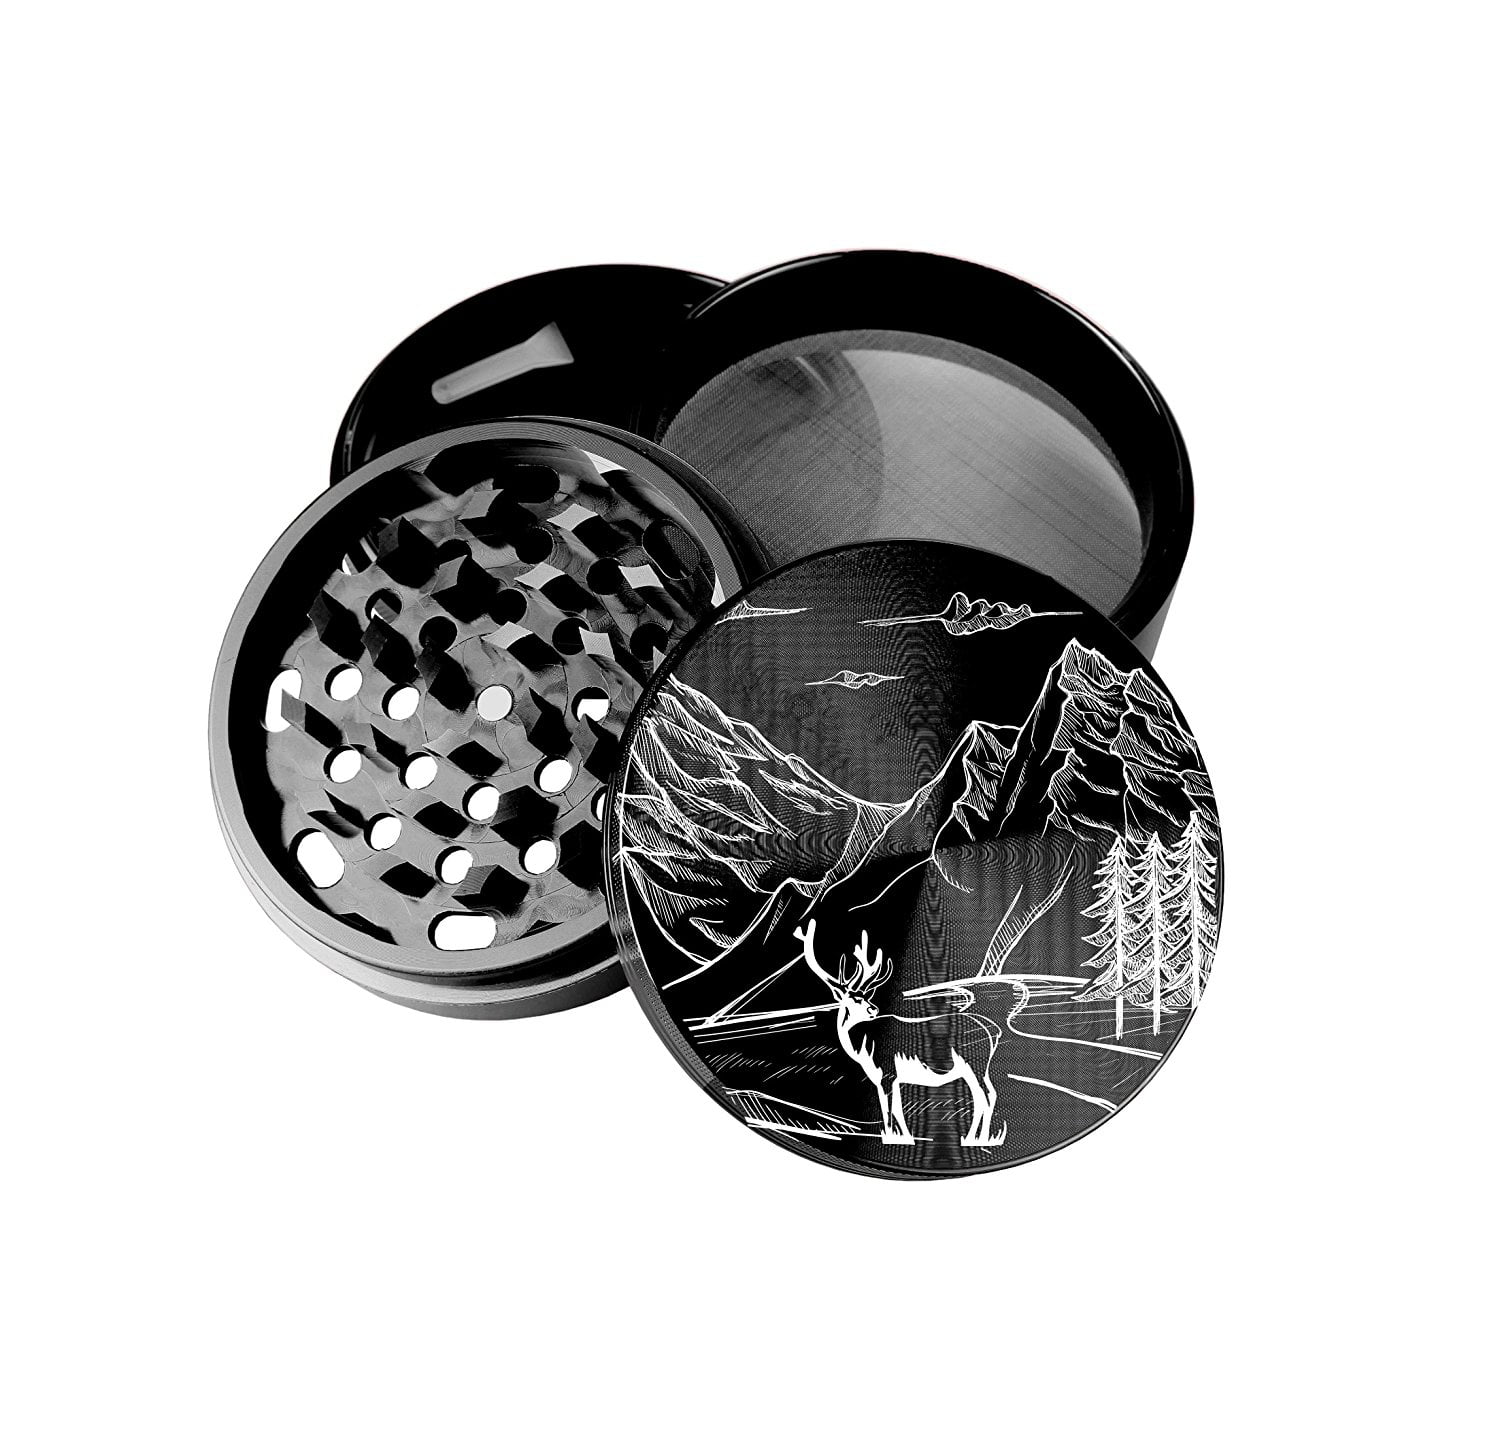 4 Piece Magnetic 2.5 Inch Black Herb Grinder Spice Aluminum With Scoop